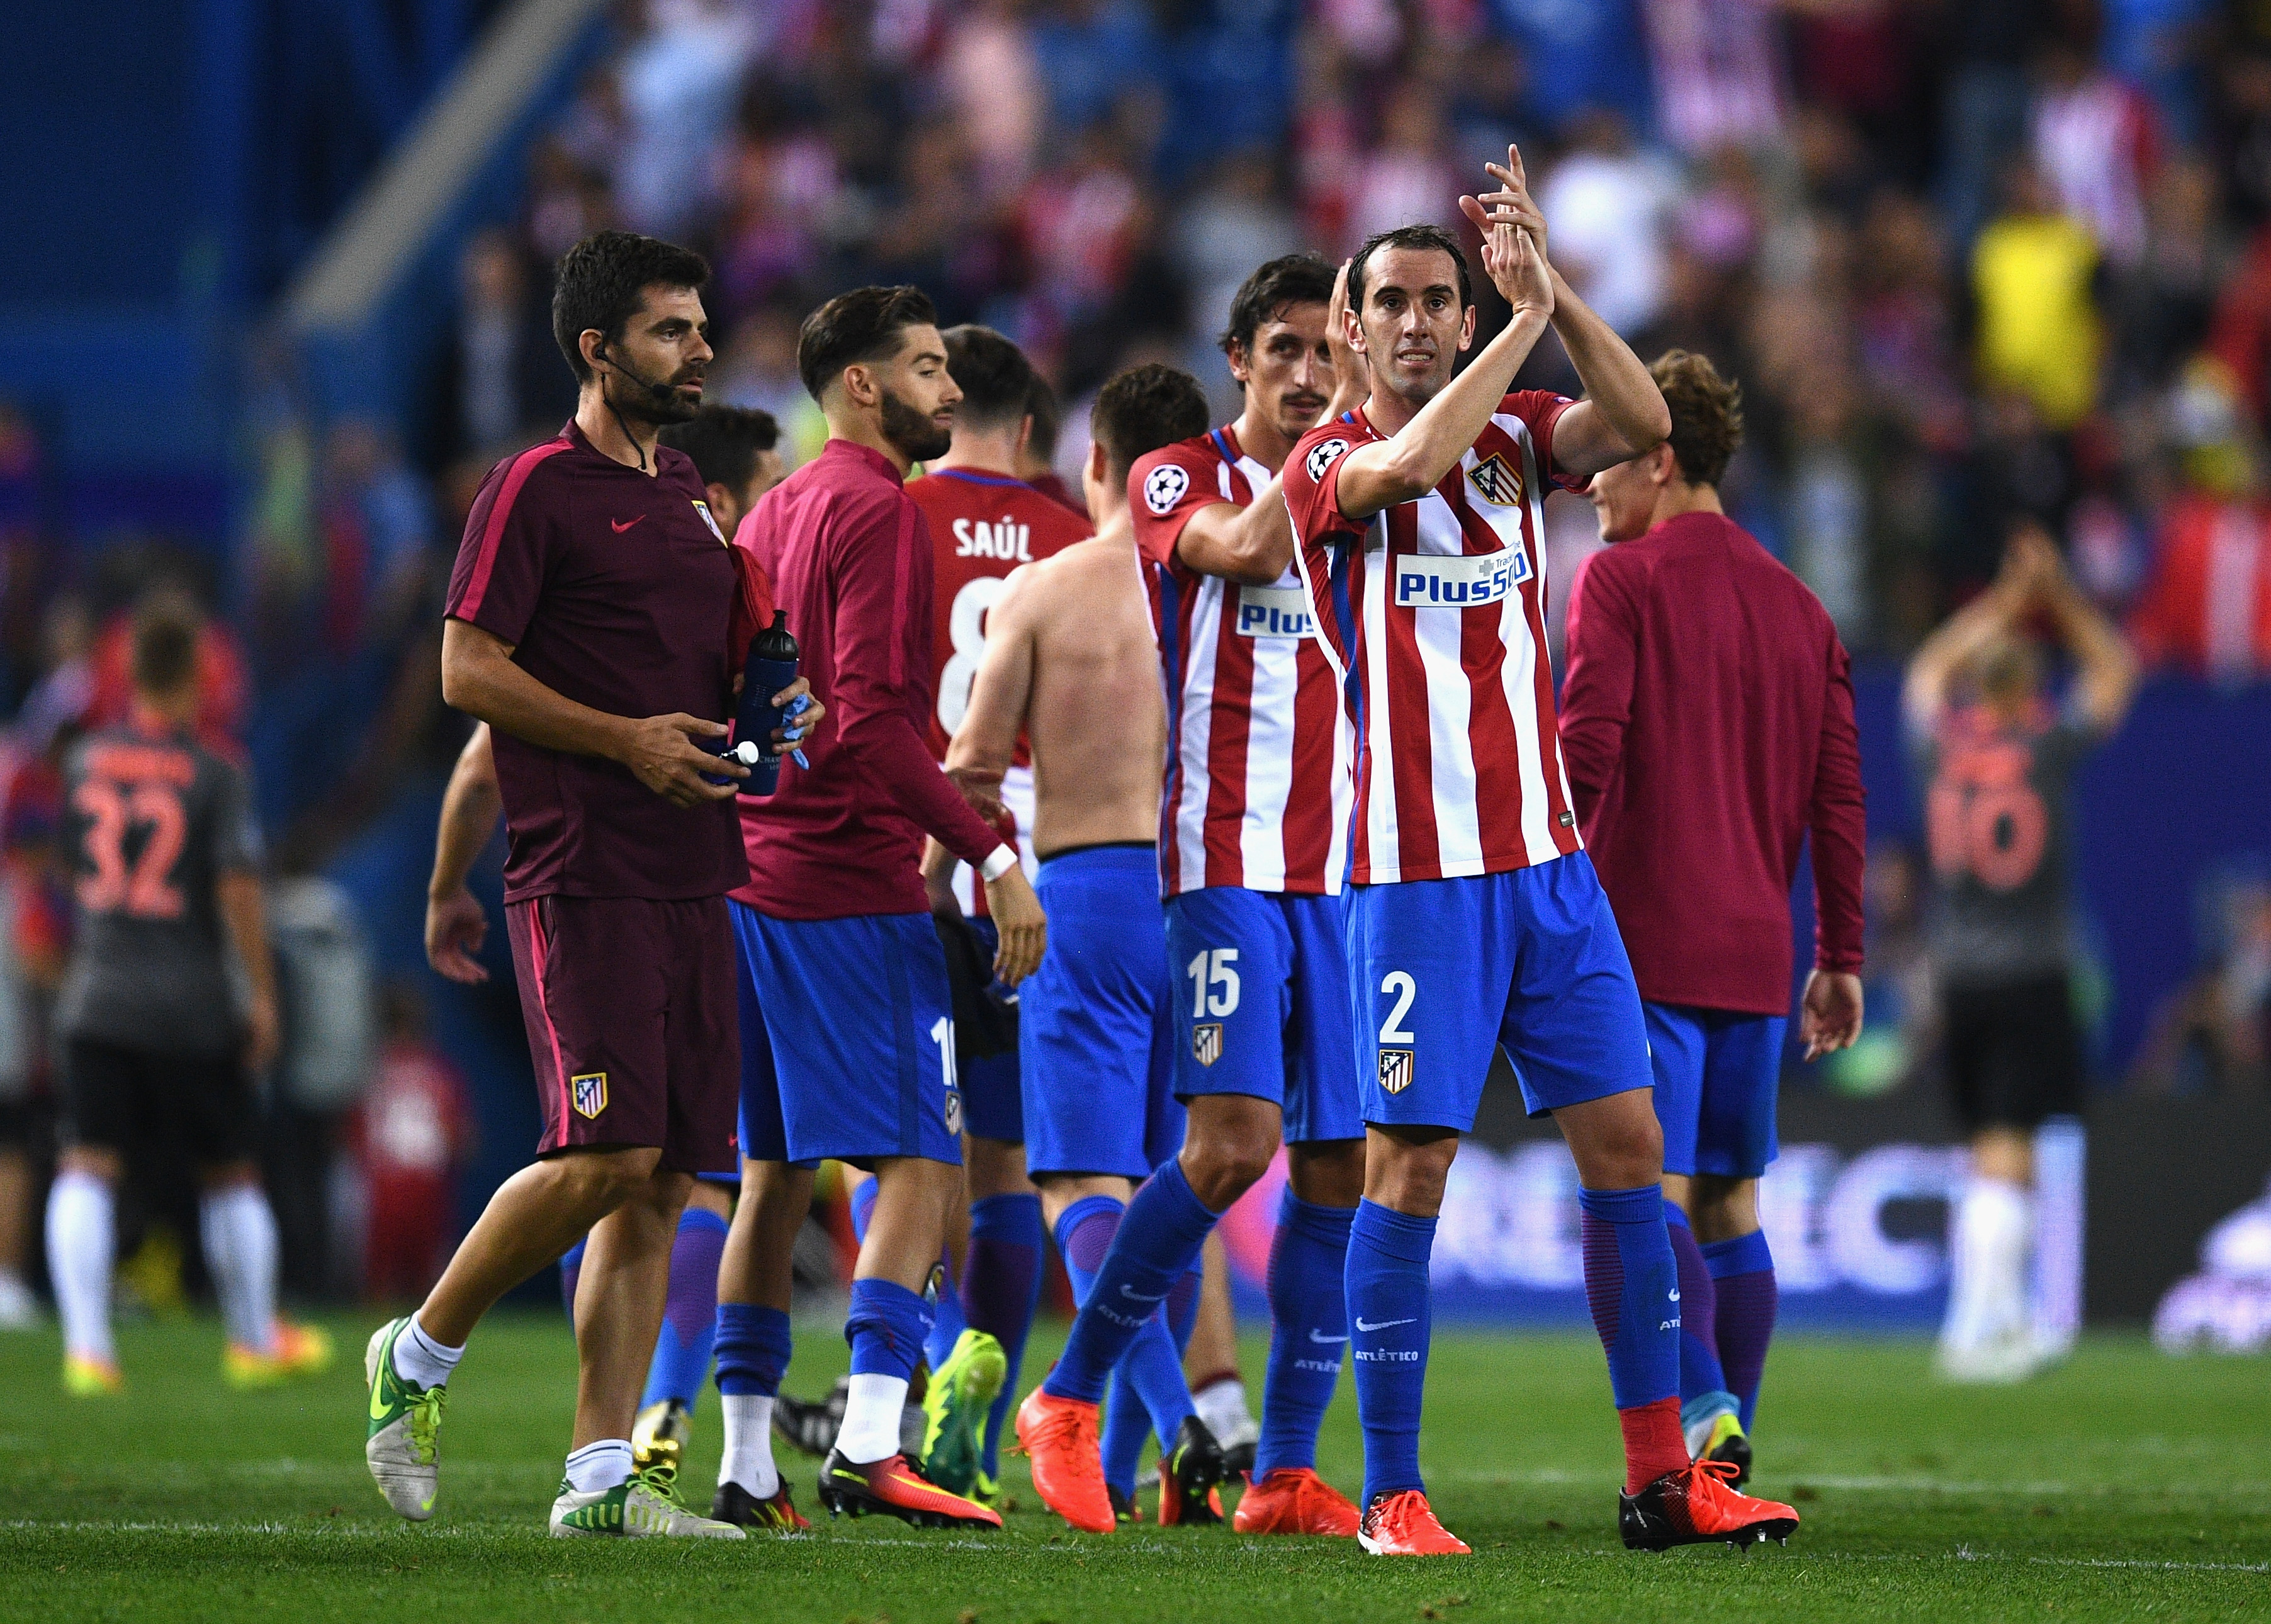 MADRID, SPAIN - SEPTEMBER 28:  Diego Godin of Atletico Madrid applauds the fans after  the UEFA Champions League group D match between Club Atletico de Madrid and FC Bayern Muenchen at the Vicente Calderon Stadium on September 28, 2016 in Madrid, Spain.  (Photo by David Ramos/Getty Images)